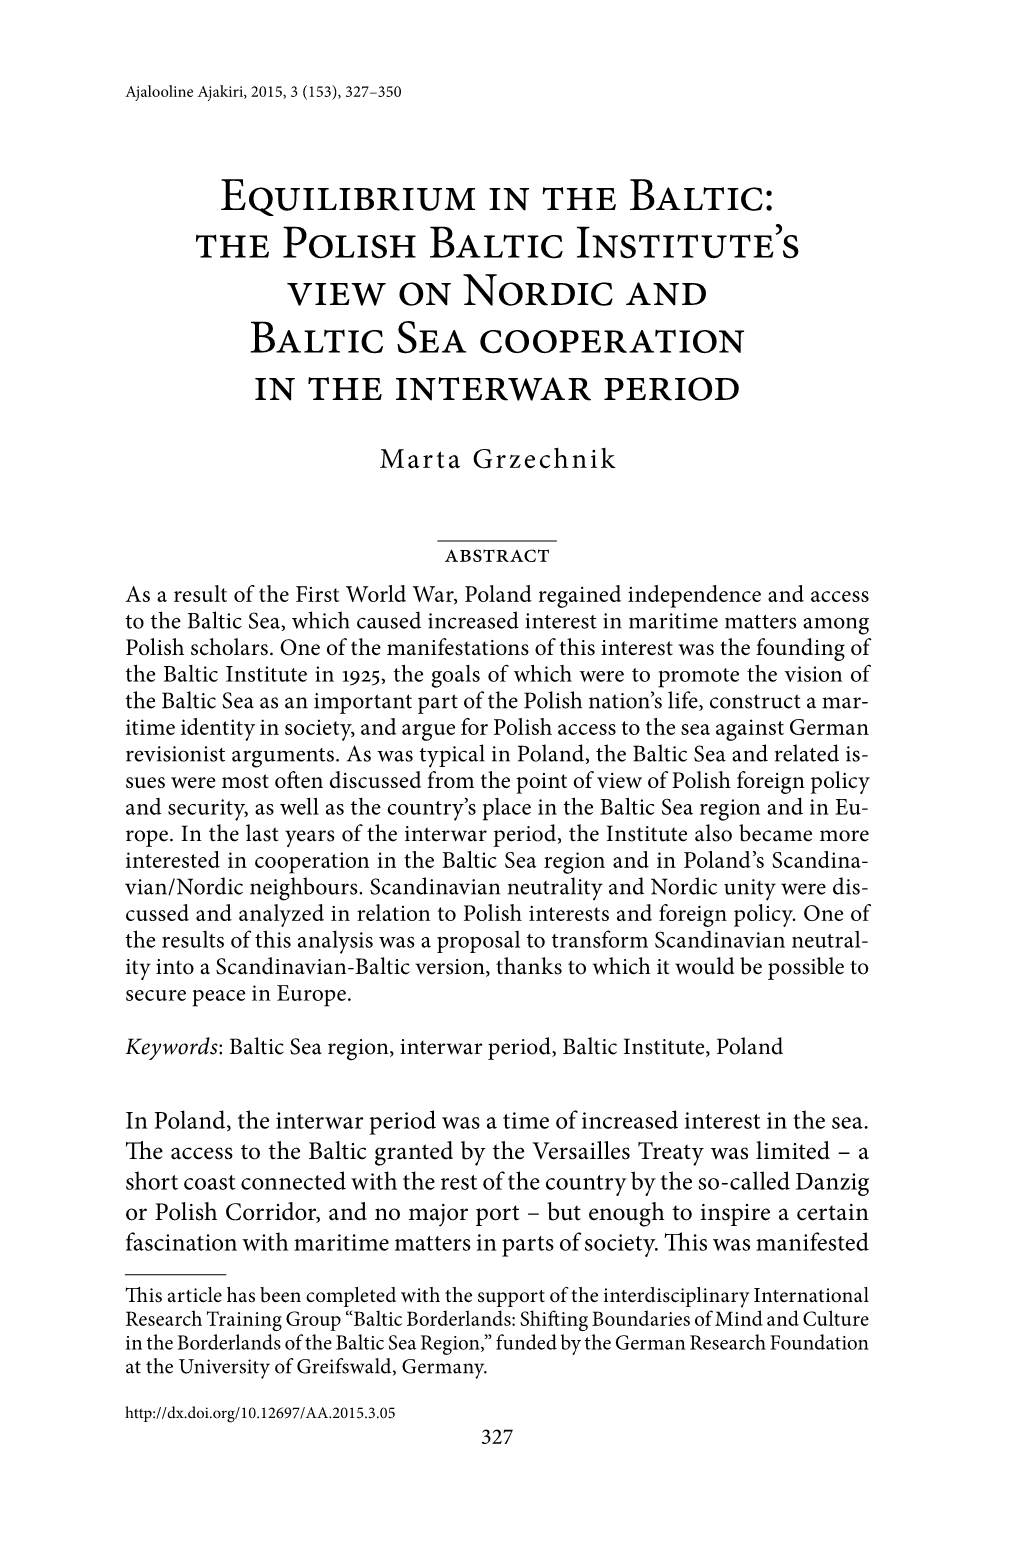 The Polish Baltic Institute's View on Nordic and Baltic Sea